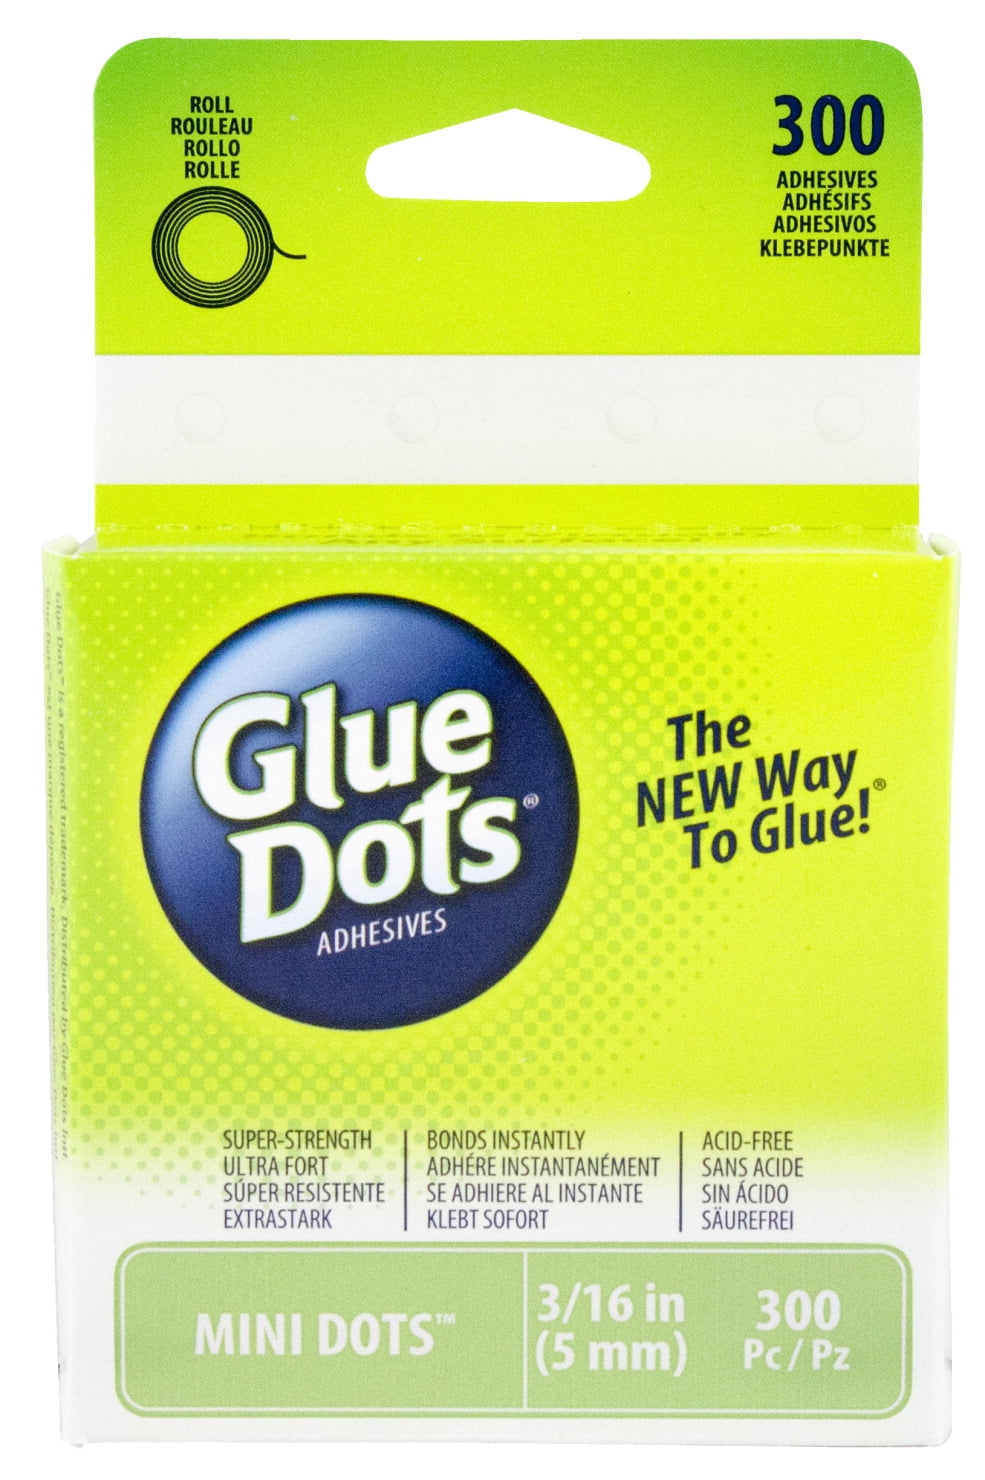 Glue Dots Mini Adhesives, 3/16 in, Pack of 300